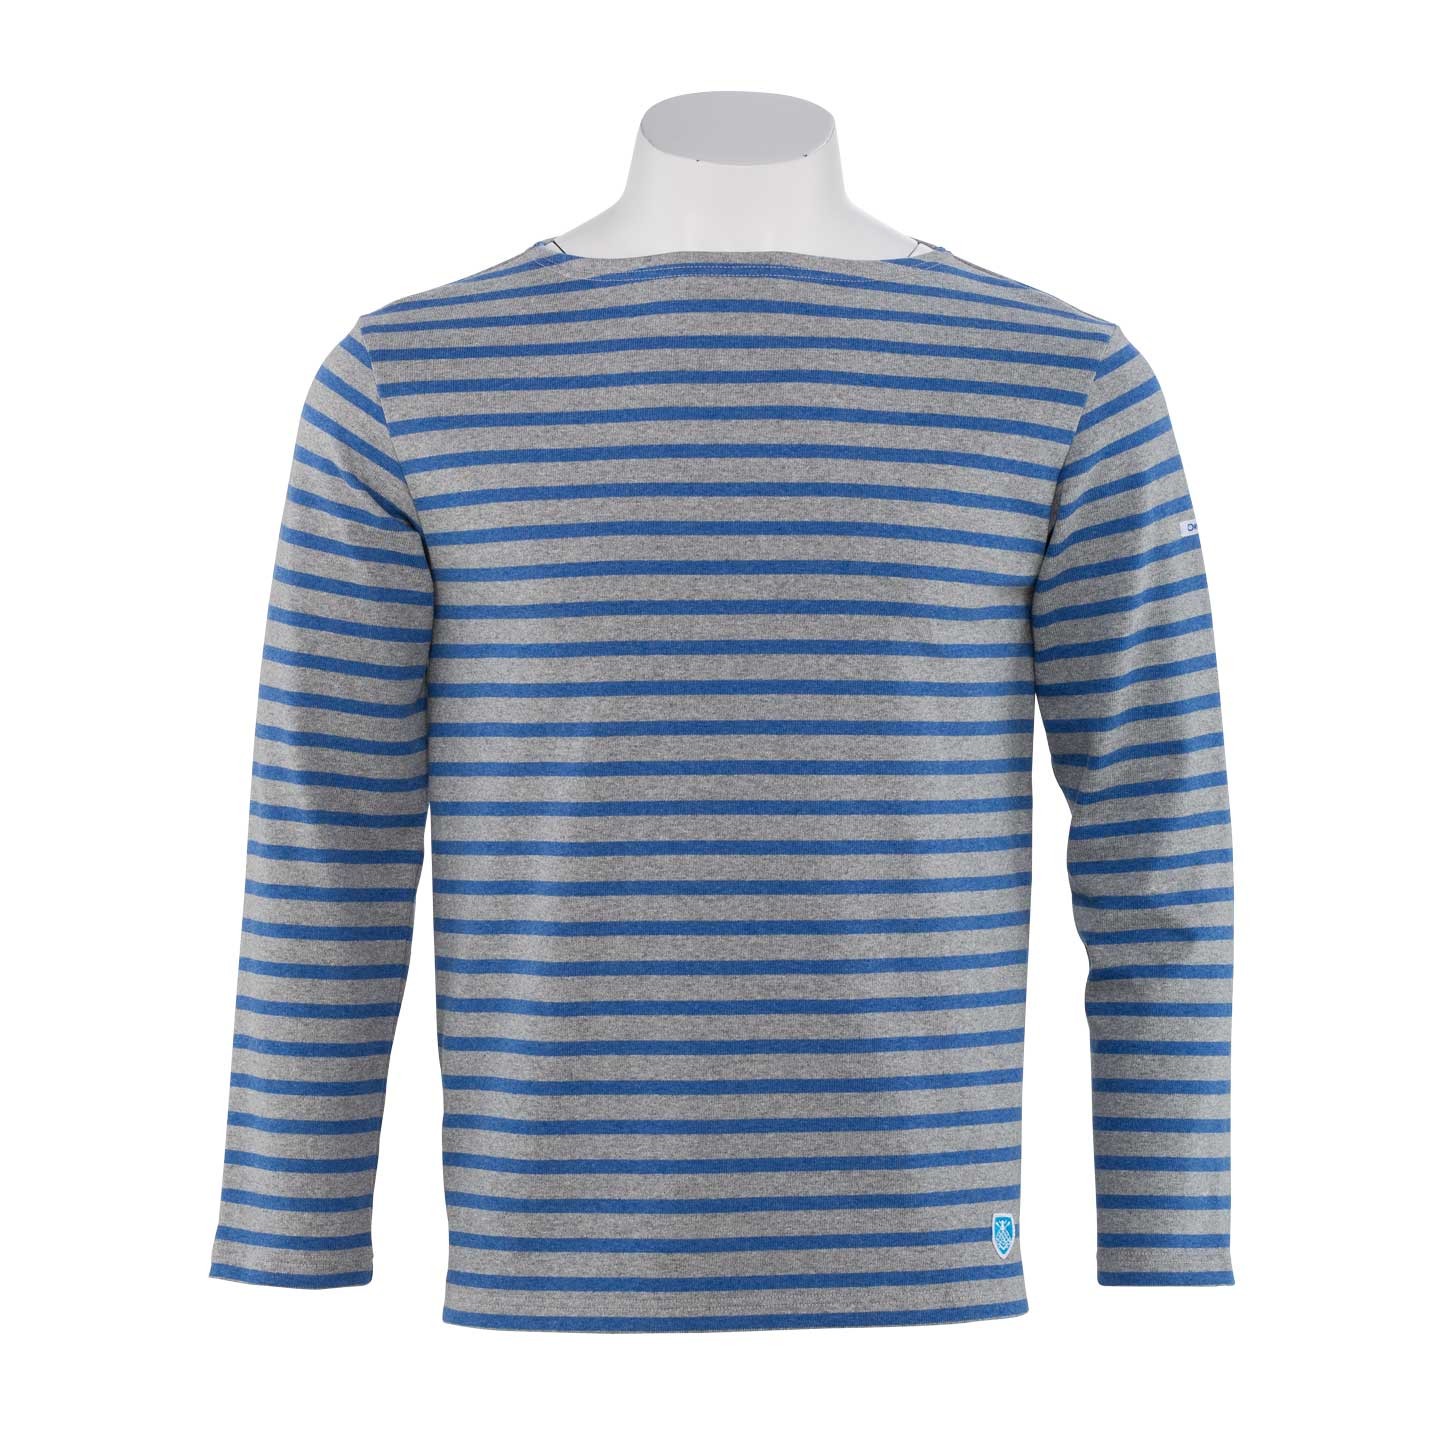 Marinière Heather Grey / Q. Blue, unisex made in France Orcival